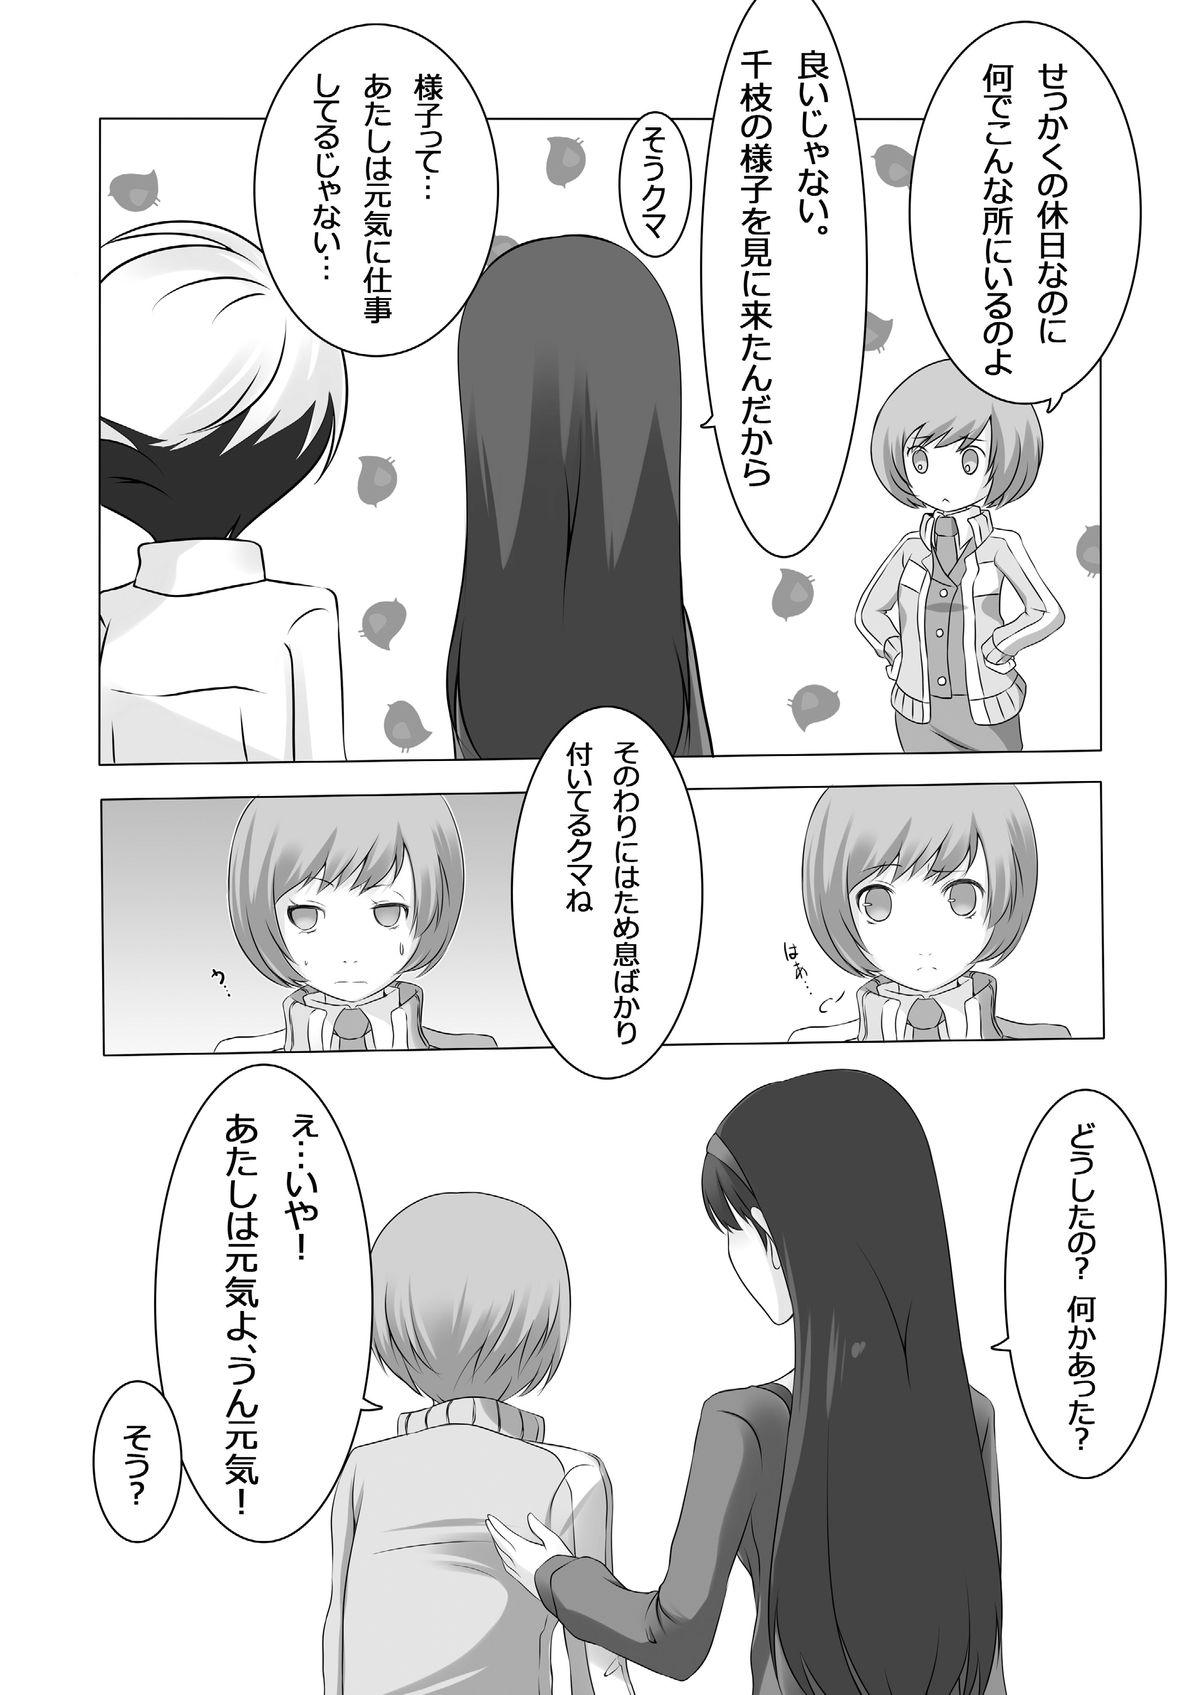 Affair Persona 4: The Doujin #2 - Persona 4 Gay Longhair - Page 5